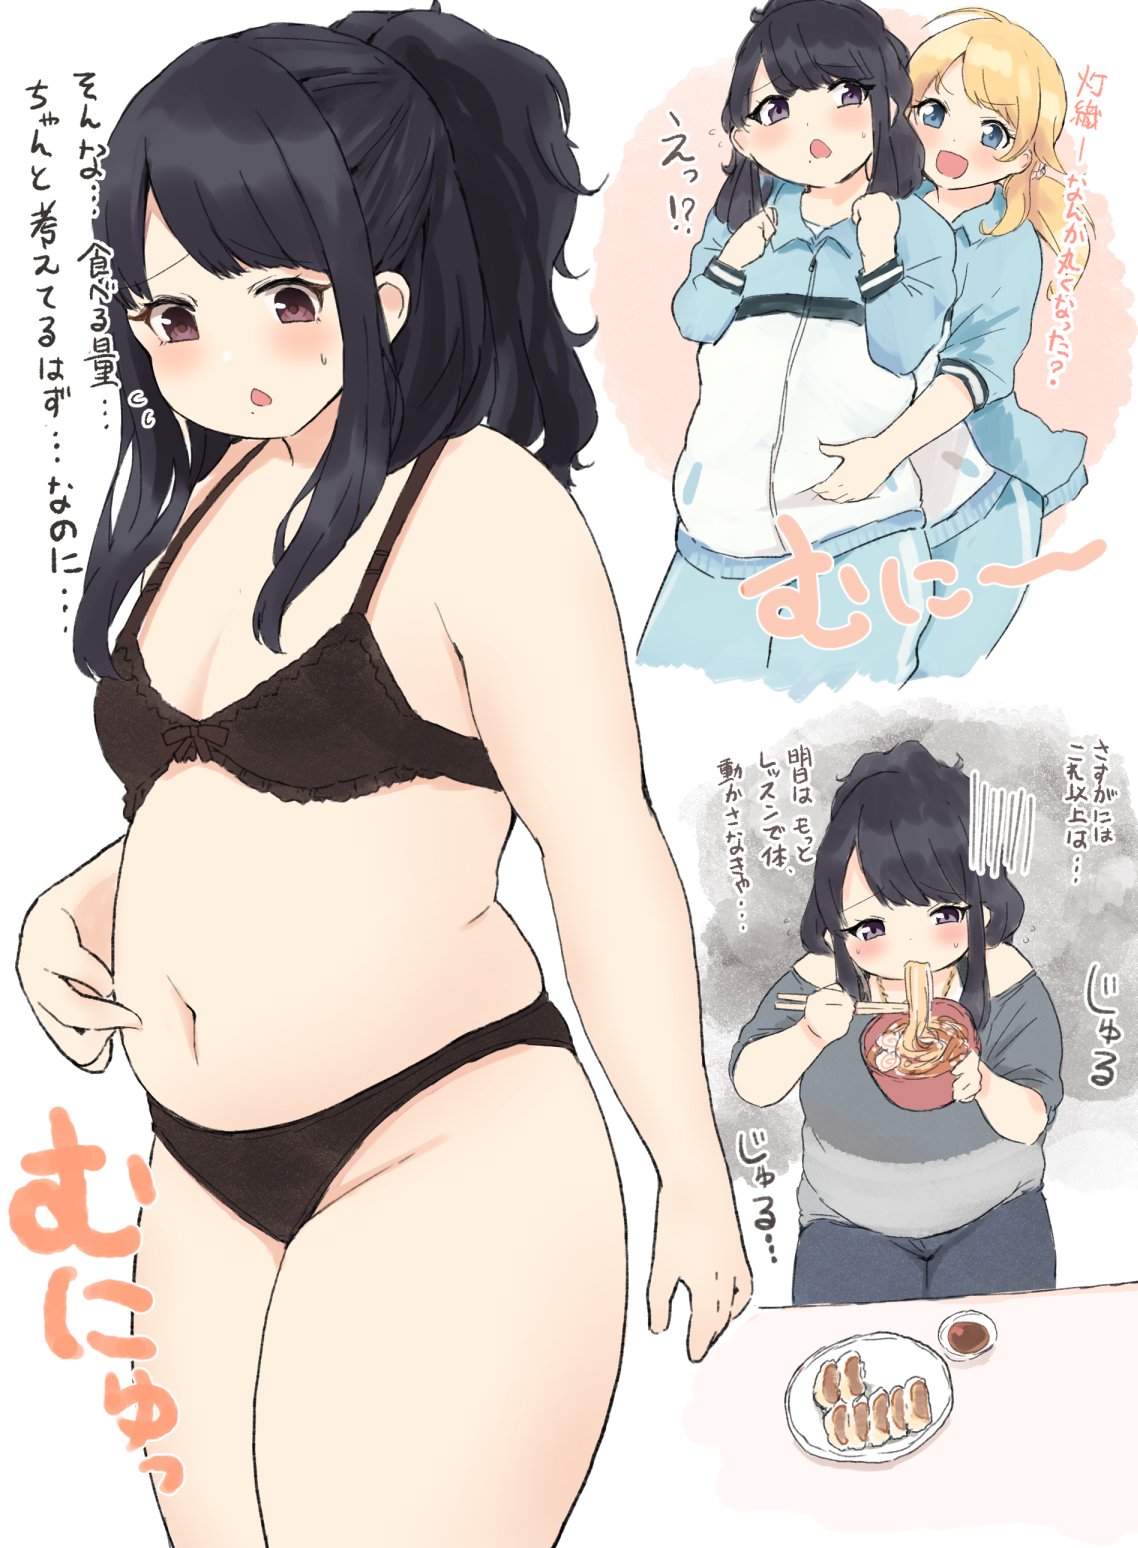 2girls bangs bare_shoulders belly_grab blush breasts dot_nose eyebrows_visible_through_hair furrowed_eyebrows highres long_sleeves looking_down multiple_girls multiple_views munimuni_kinoko navel open_mouth plump short_sleeves small_breasts thick_thighs thighs weight_conscious